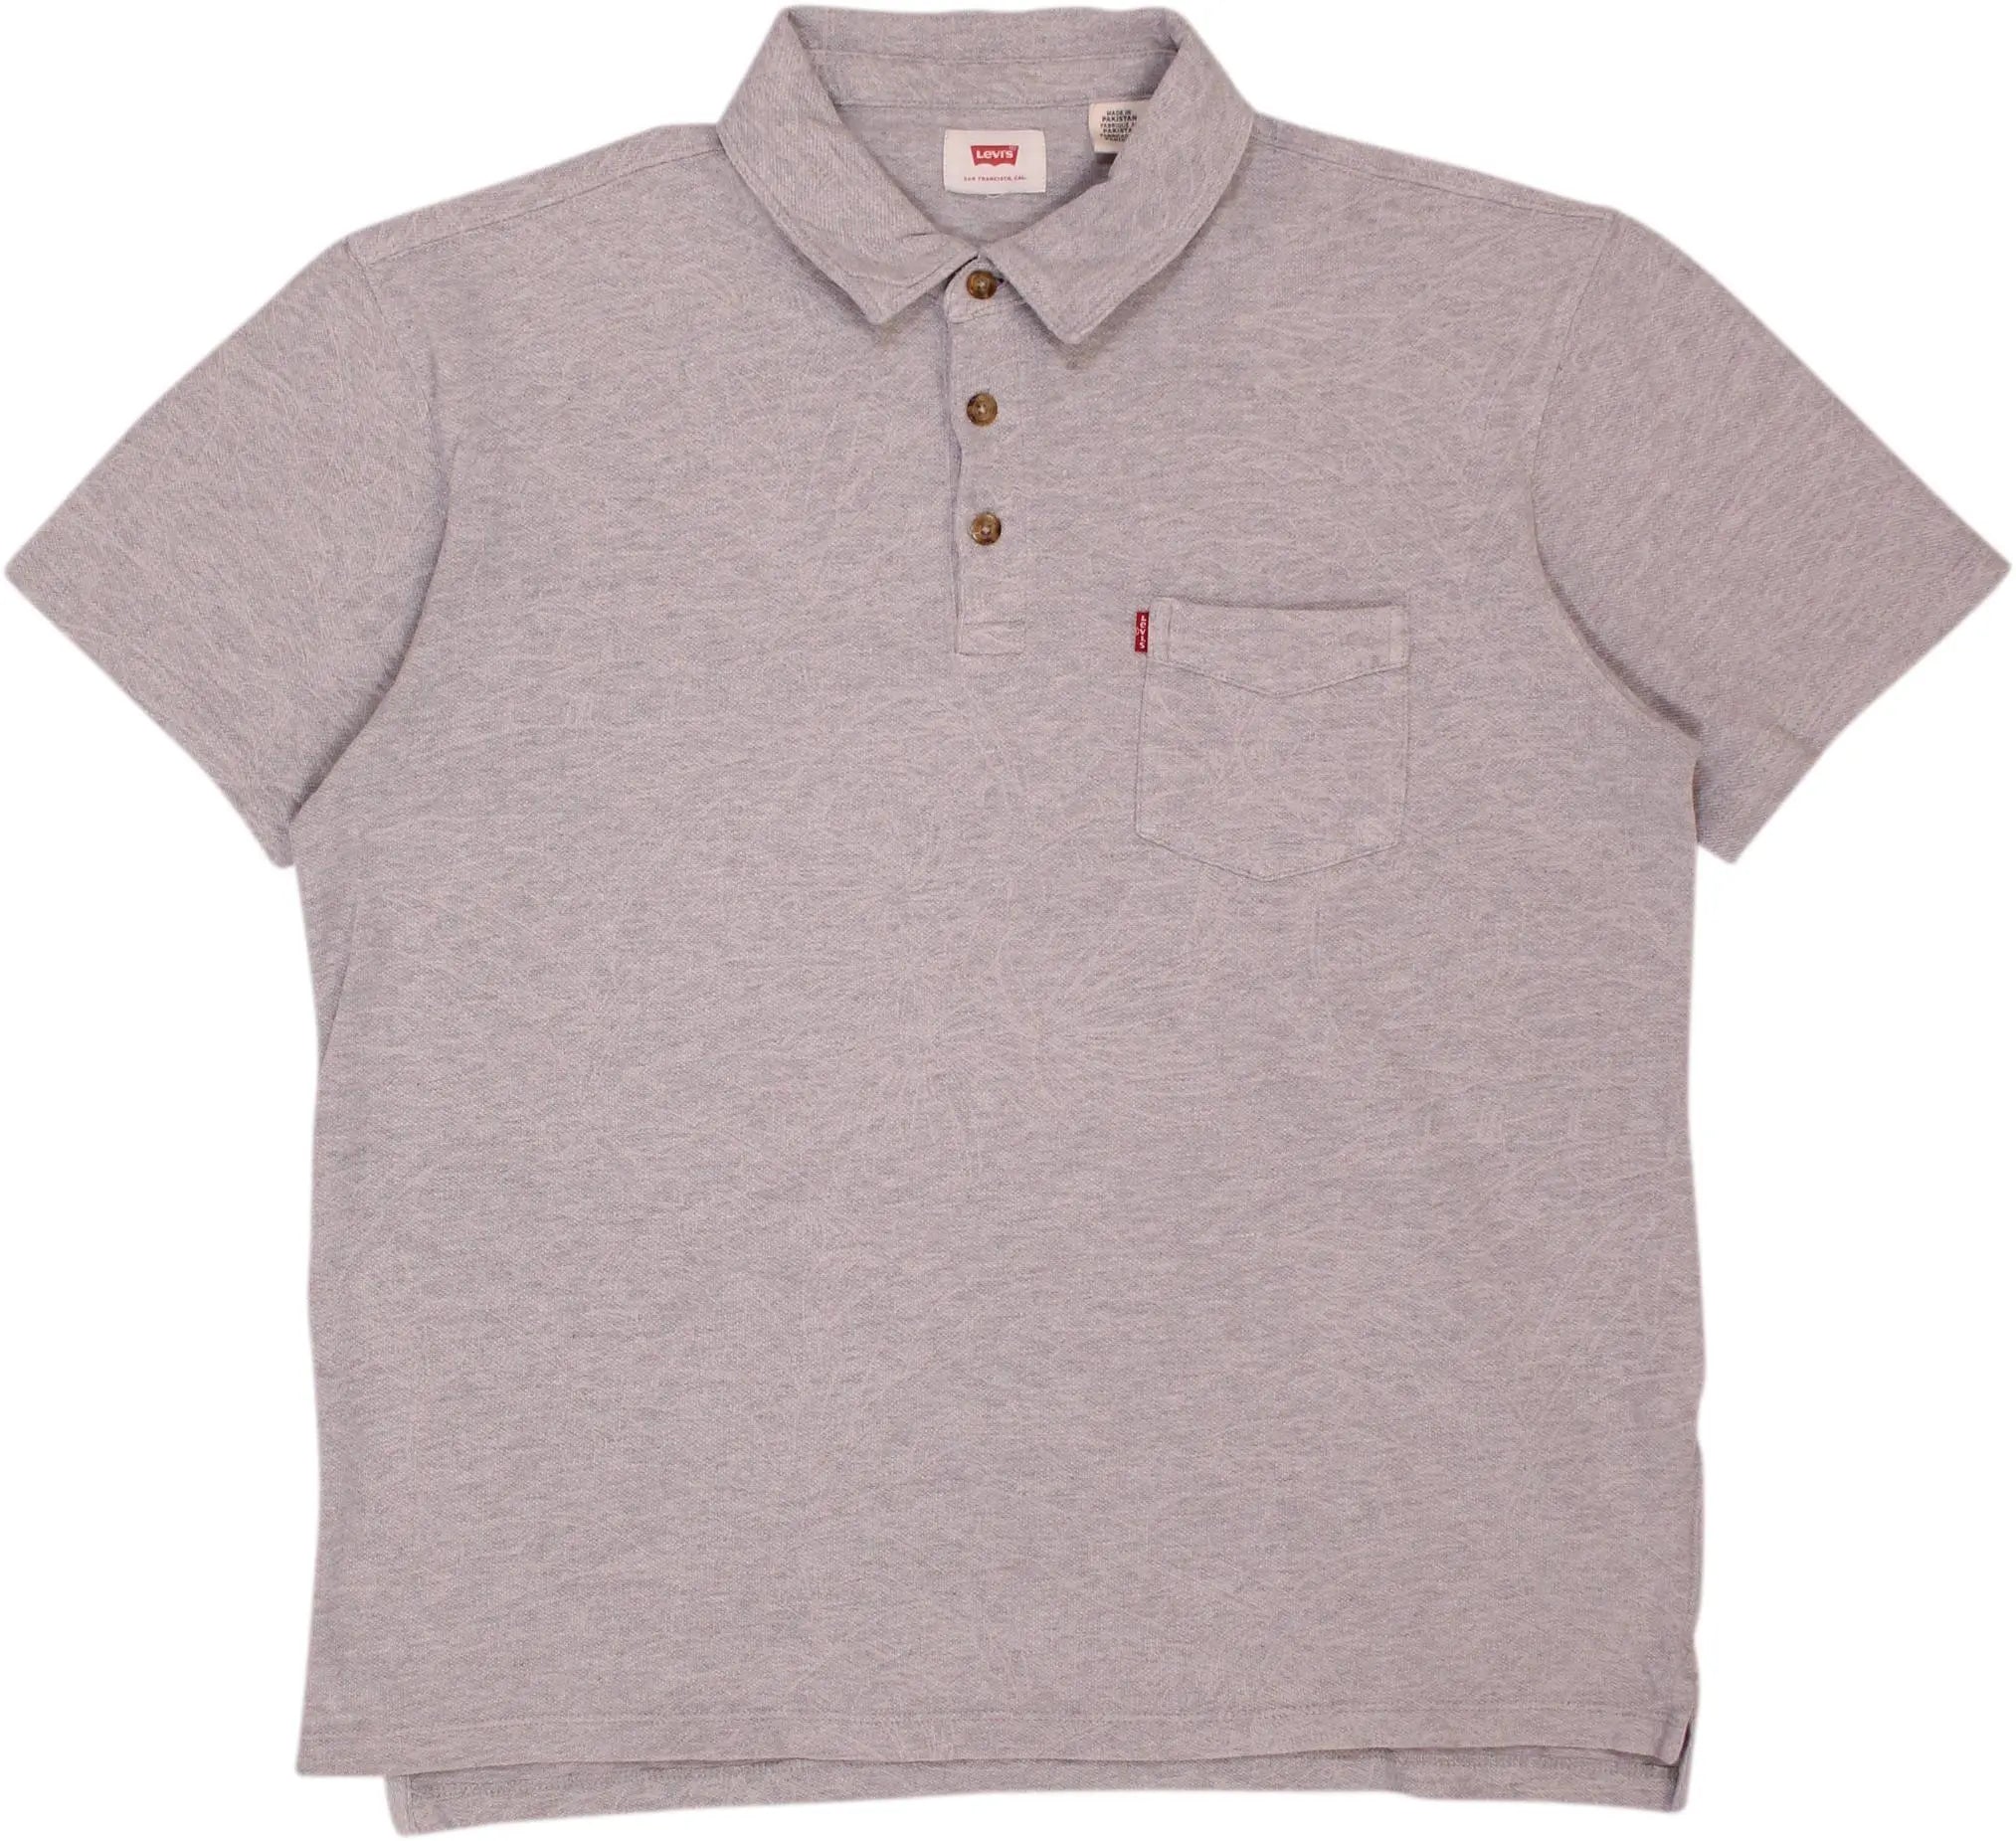 Levi's - Grey Polo Shirt with Light Pattern by Levi's- ThriftTale.com - Vintage and second handclothing